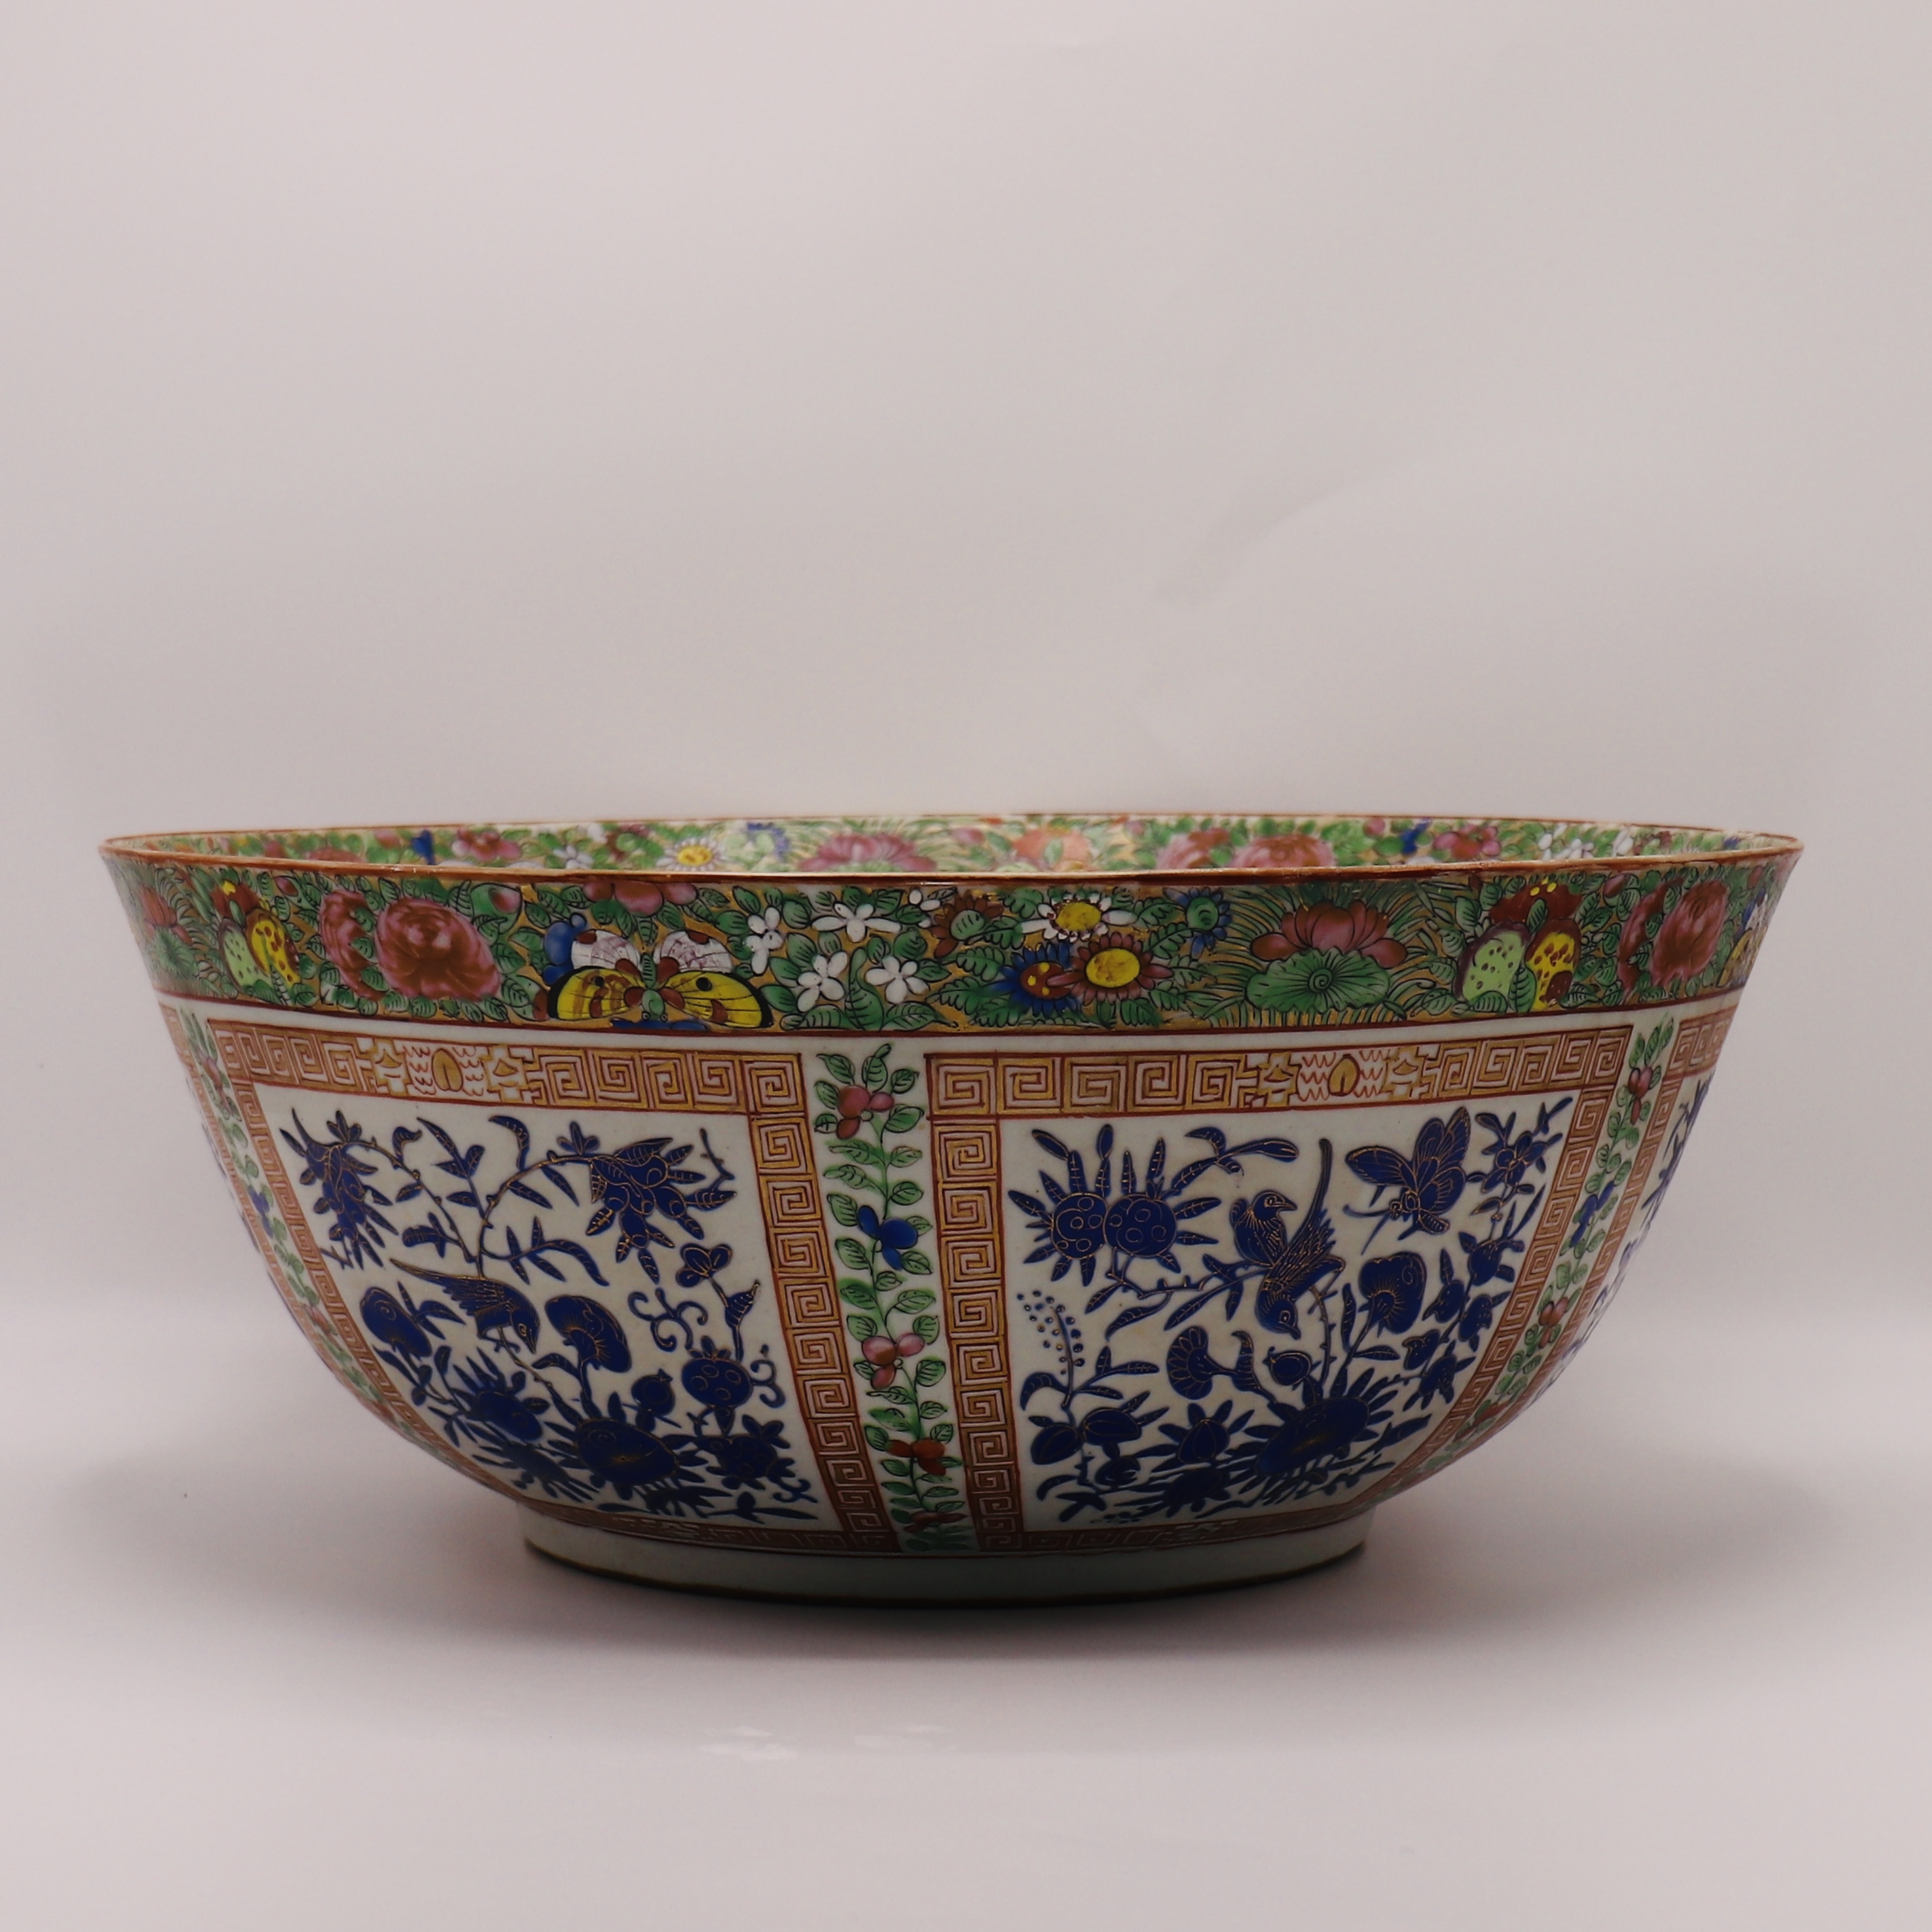 A LARGE CHINESE FAMILLE ROSE PUNCH BOWL WITH ISLAMIC INSCRIPTION, QING DYNASTY (1644-1911) - Image 2 of 6